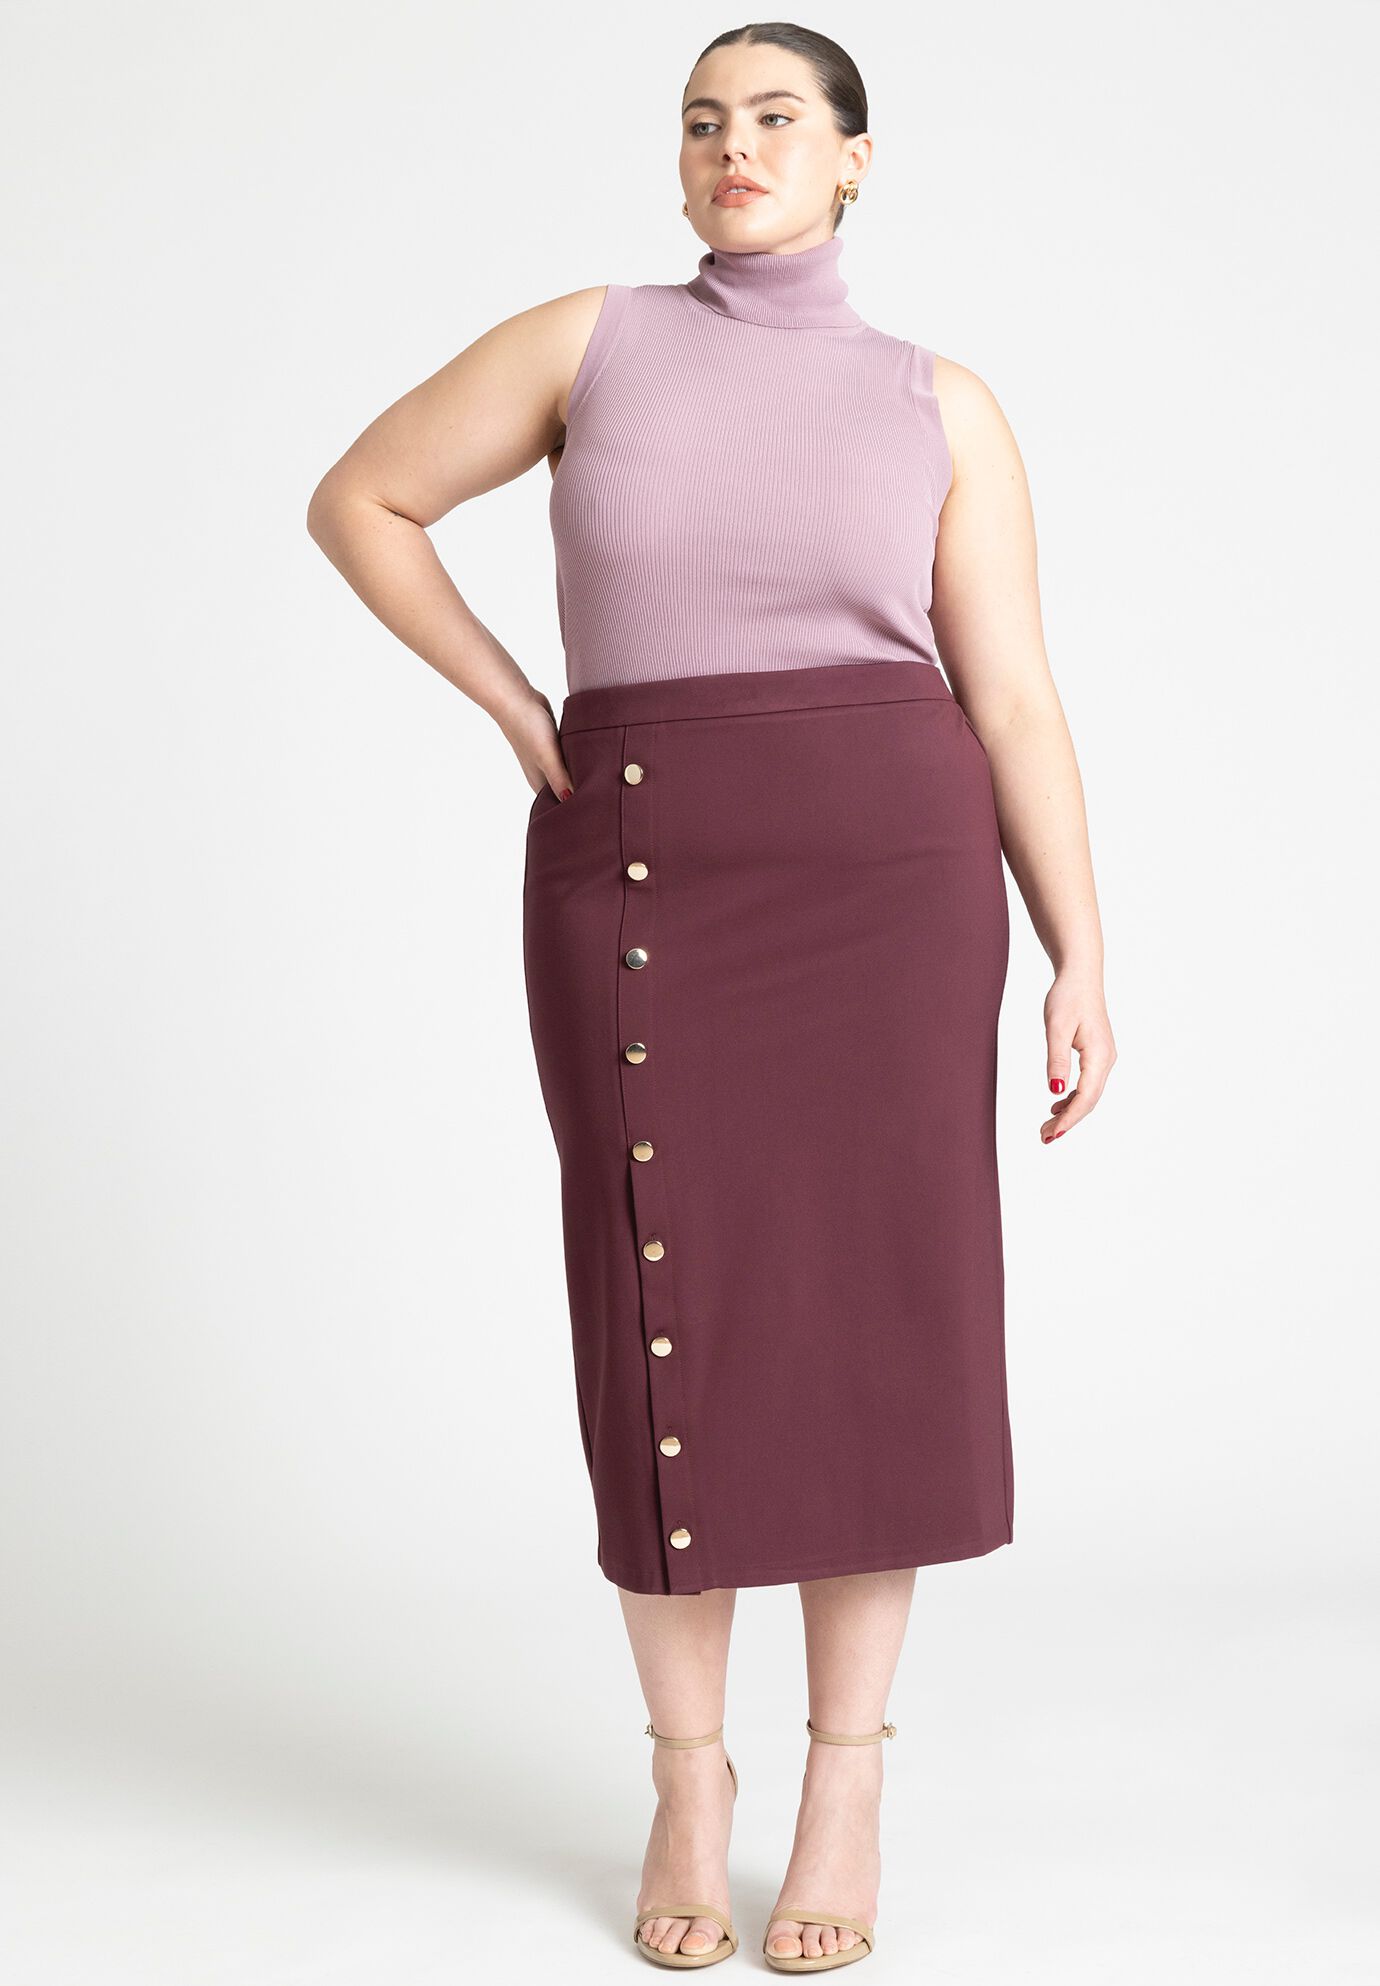 Plus Size Women Side Placket Skirt By (size 20)